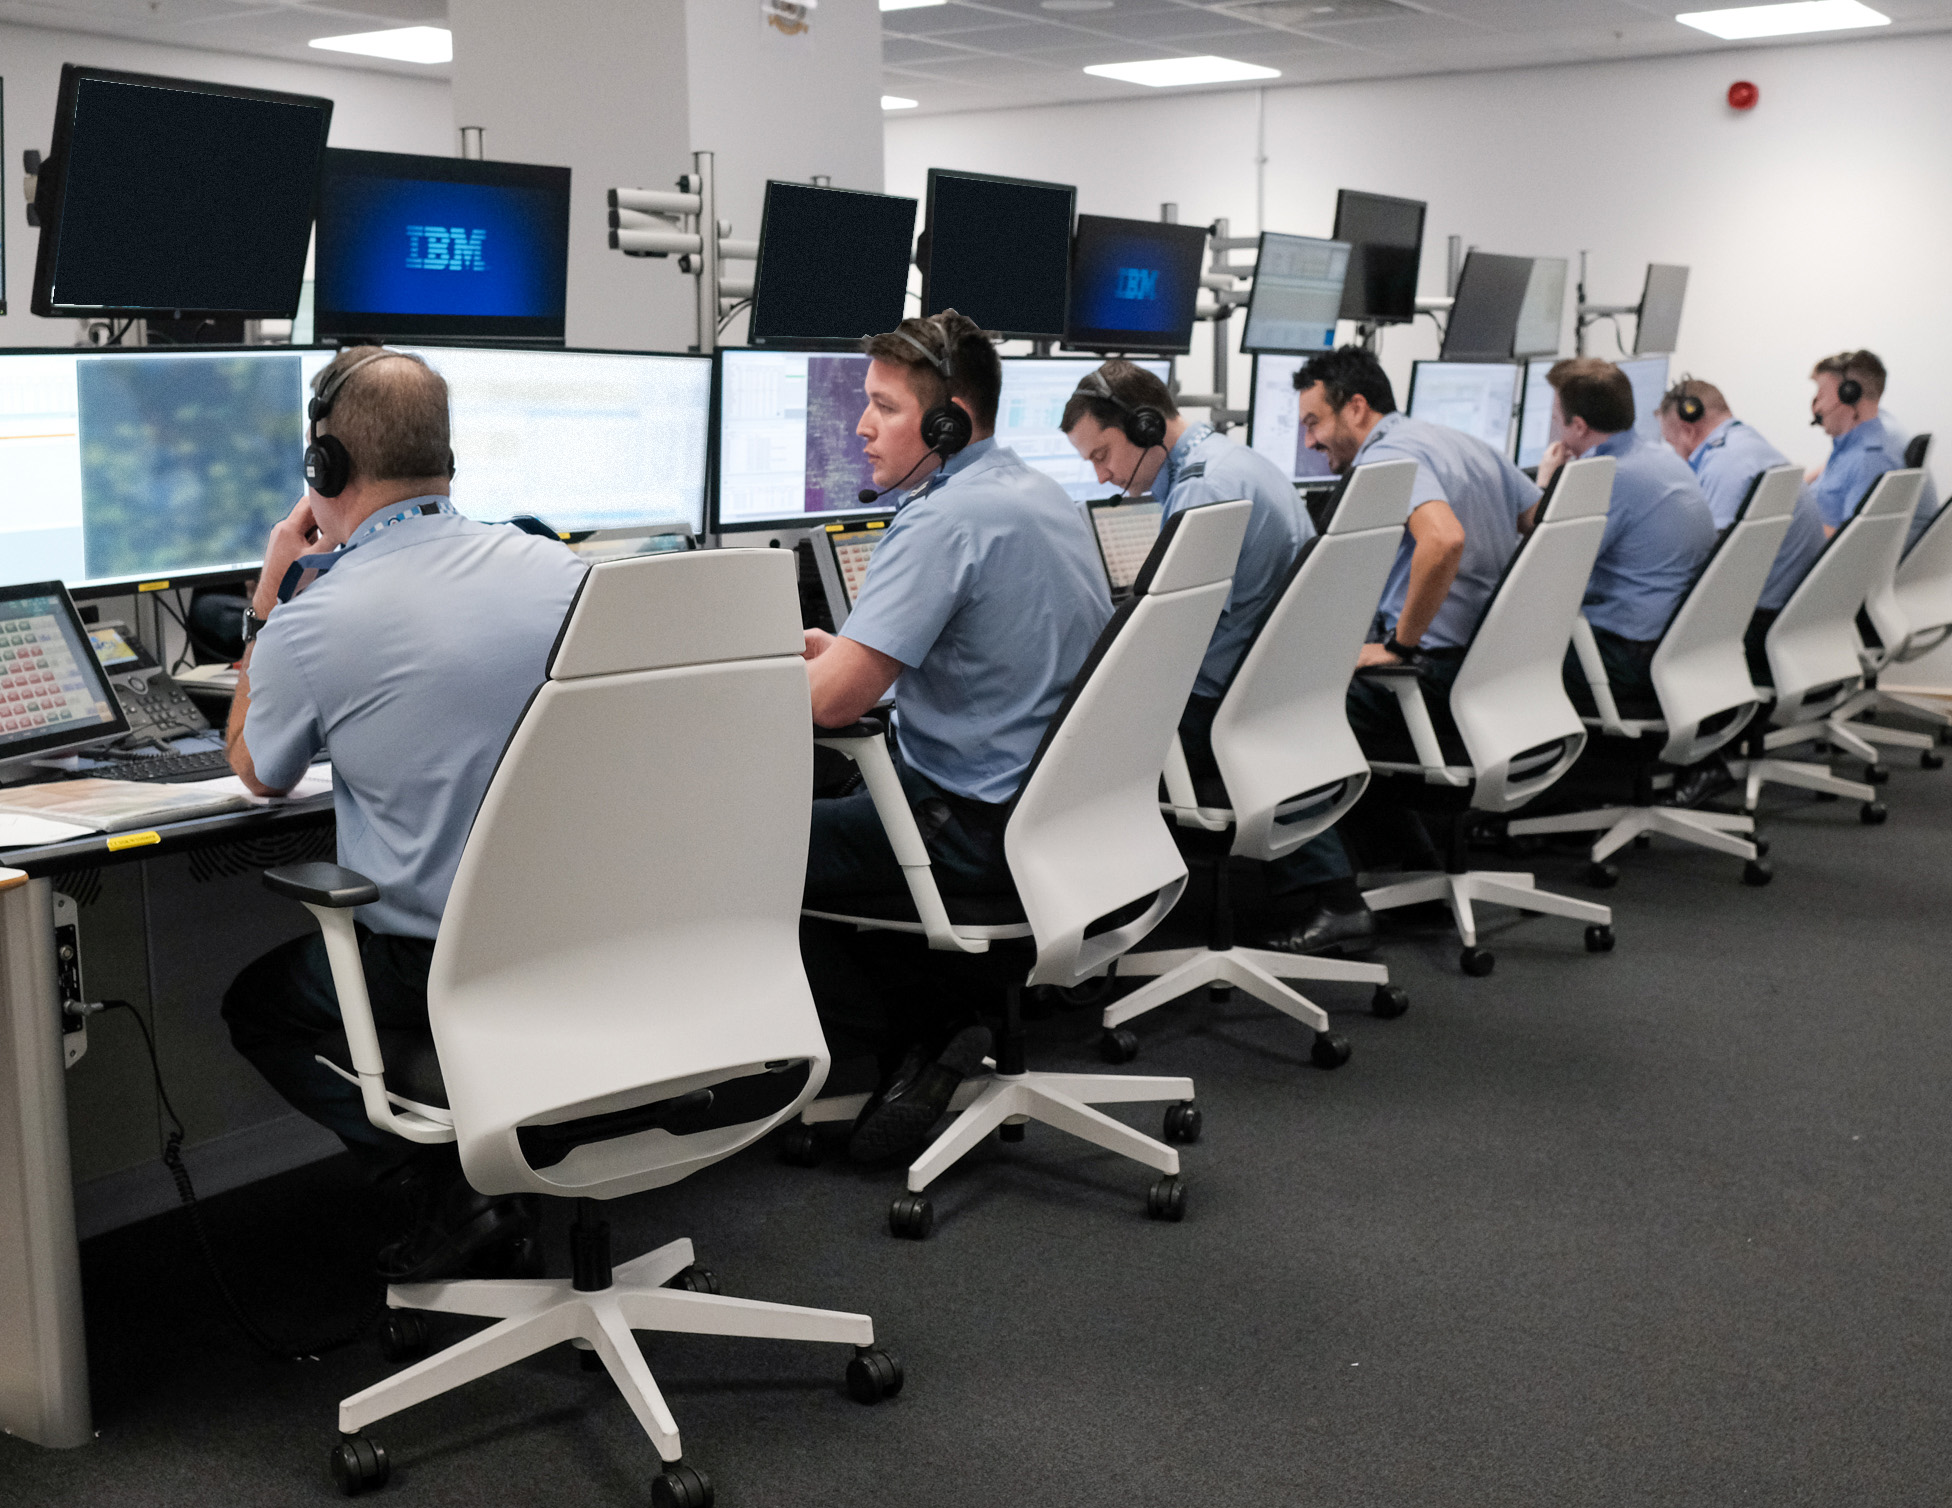 Battlespace Management Operators at work, sat at computers in a row wearing head sets